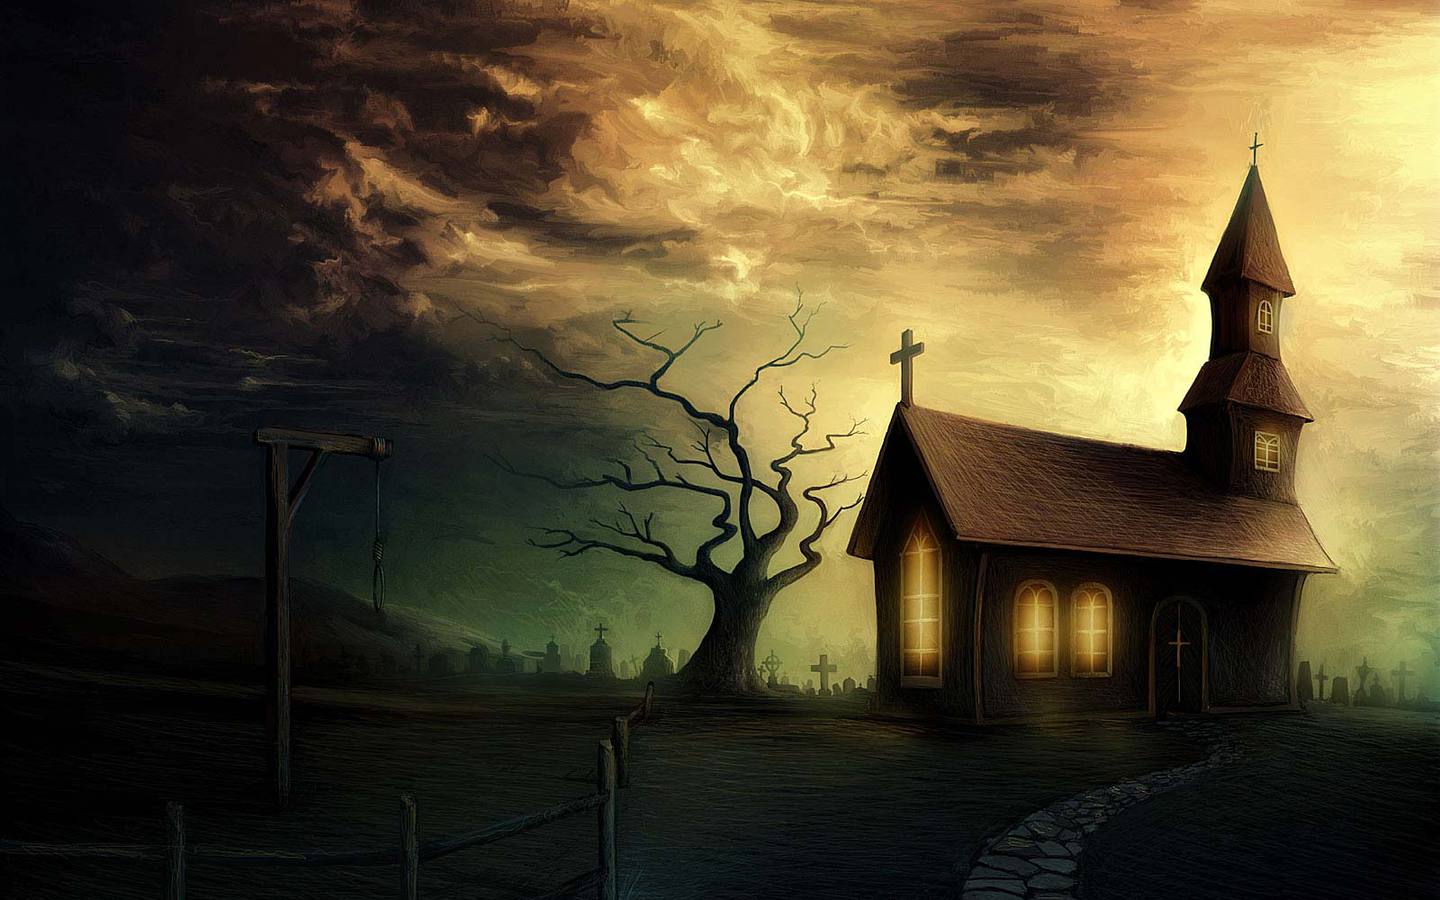 Horror Ghost Houses wallpaper HQ image size, 1440x900